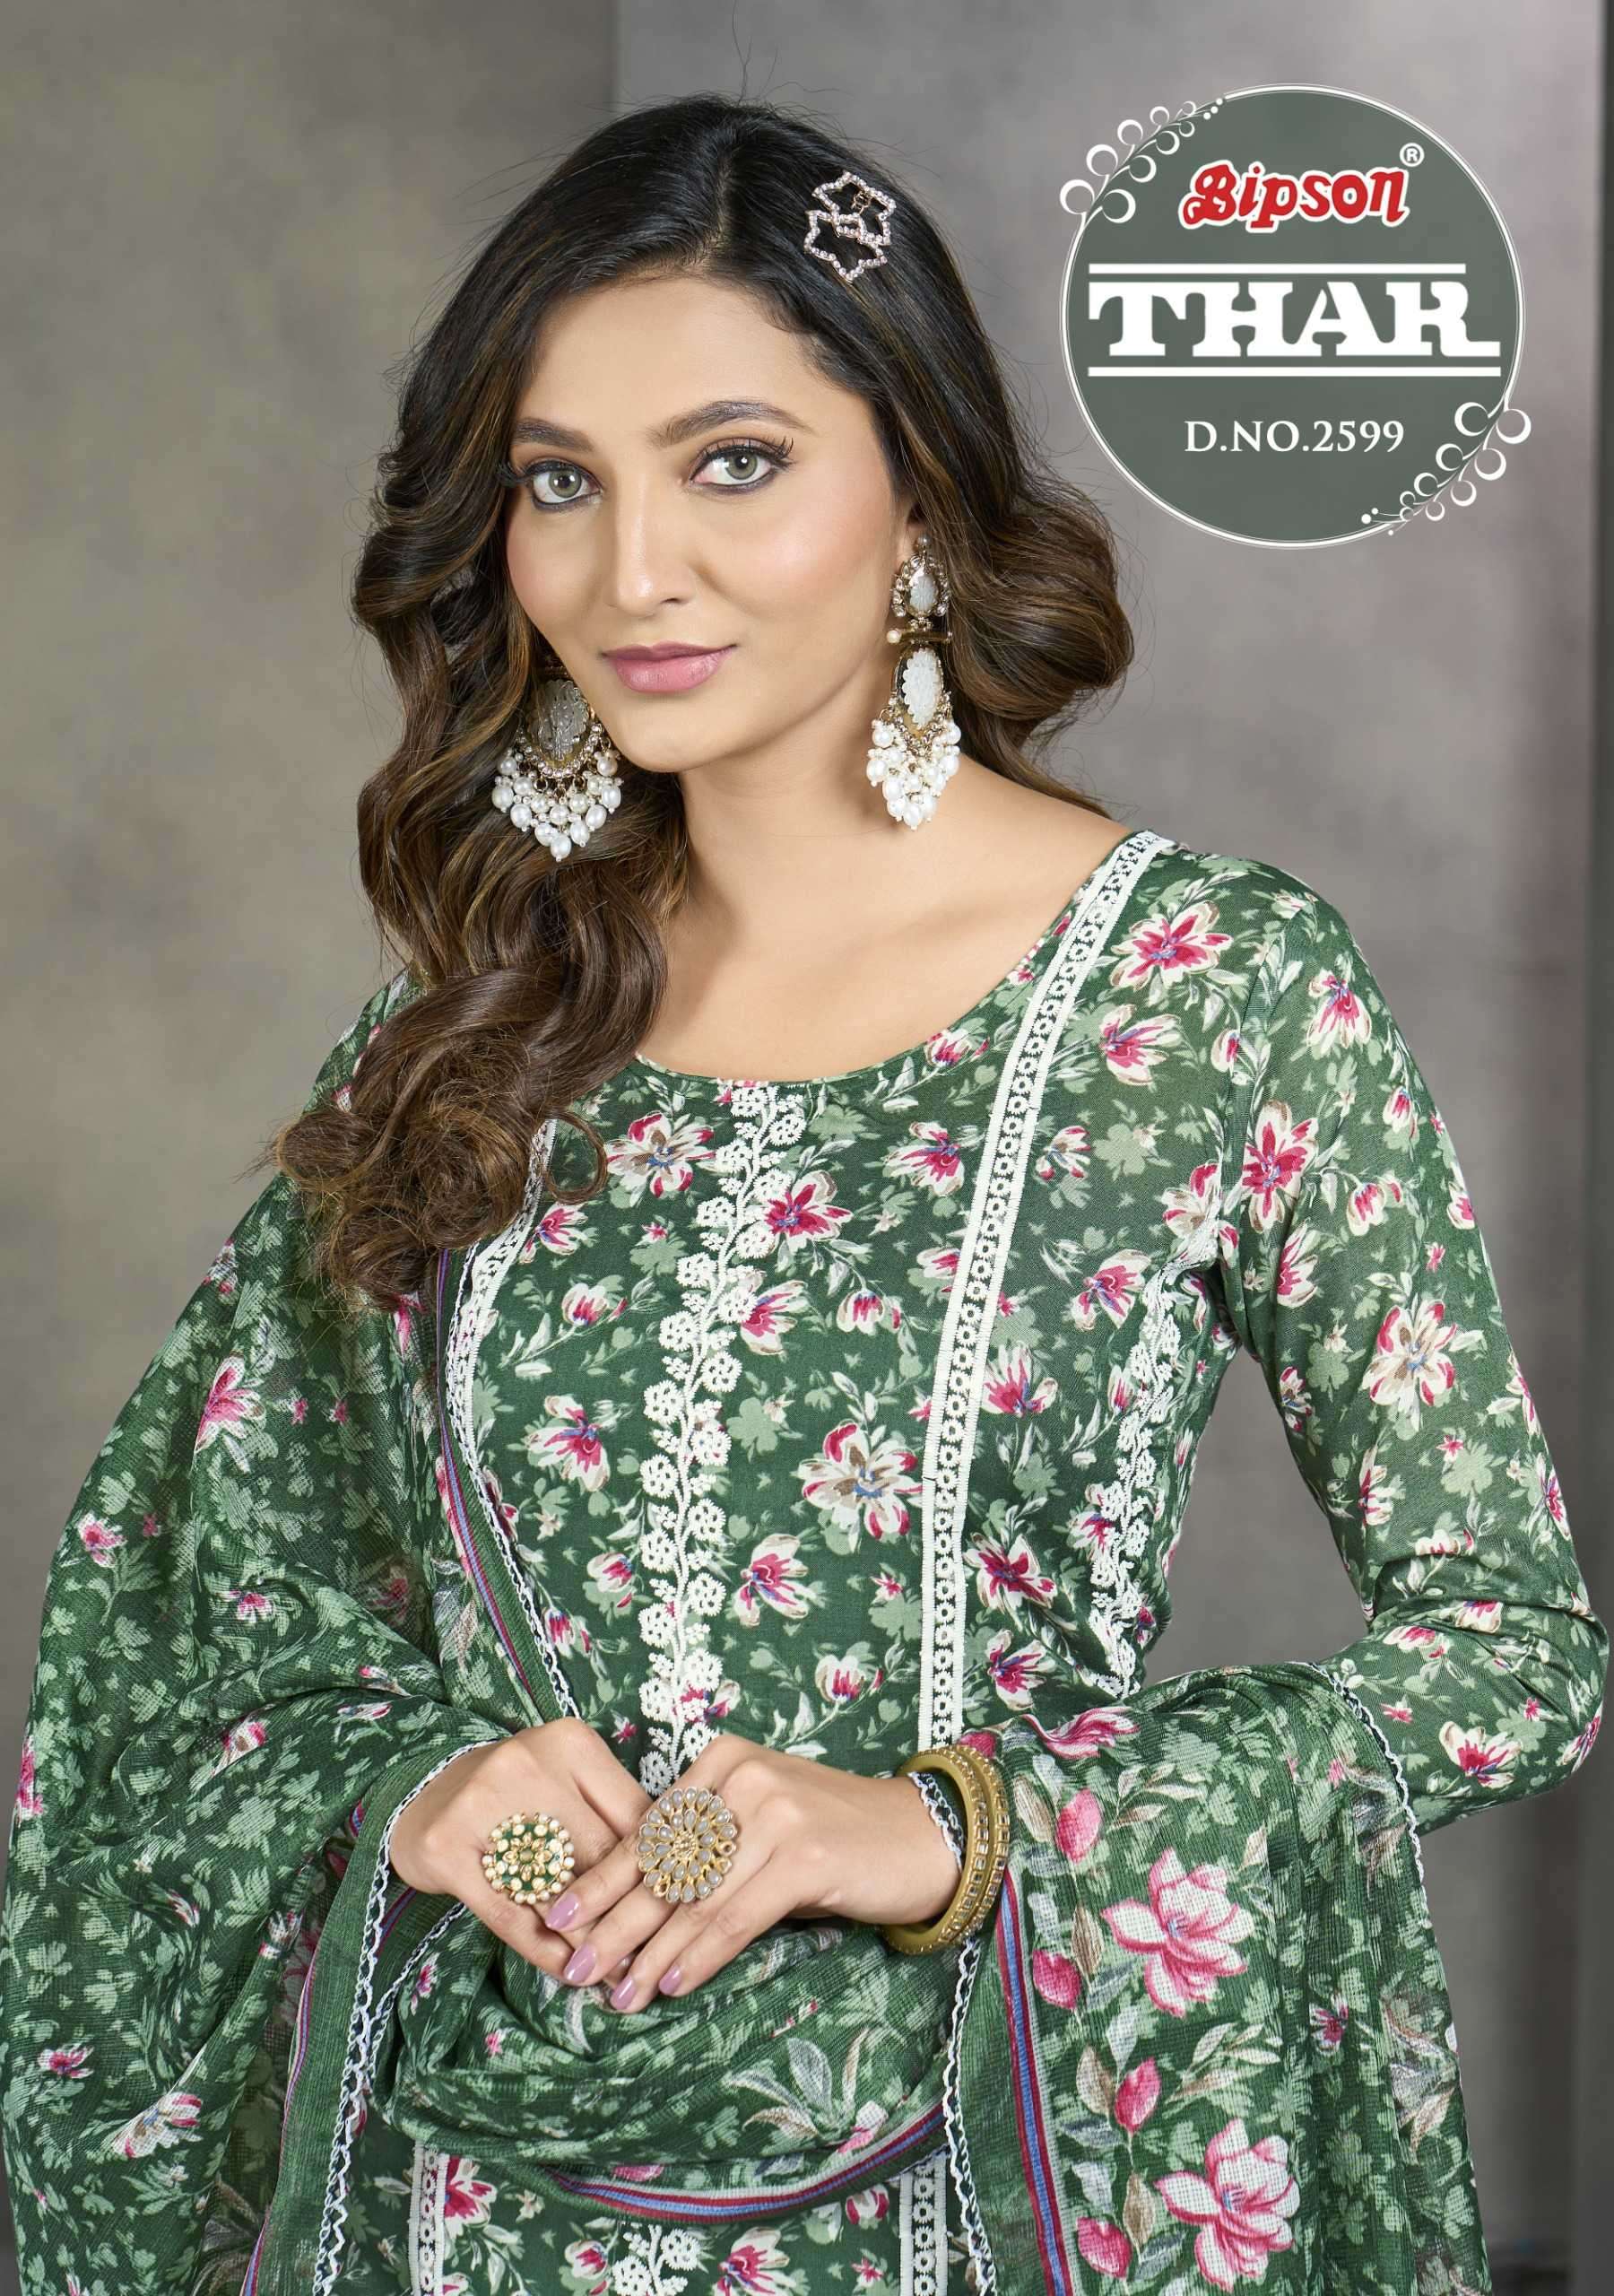 bipson thar 2599 Pure Cotton Print White Thread Embroidery Work suit